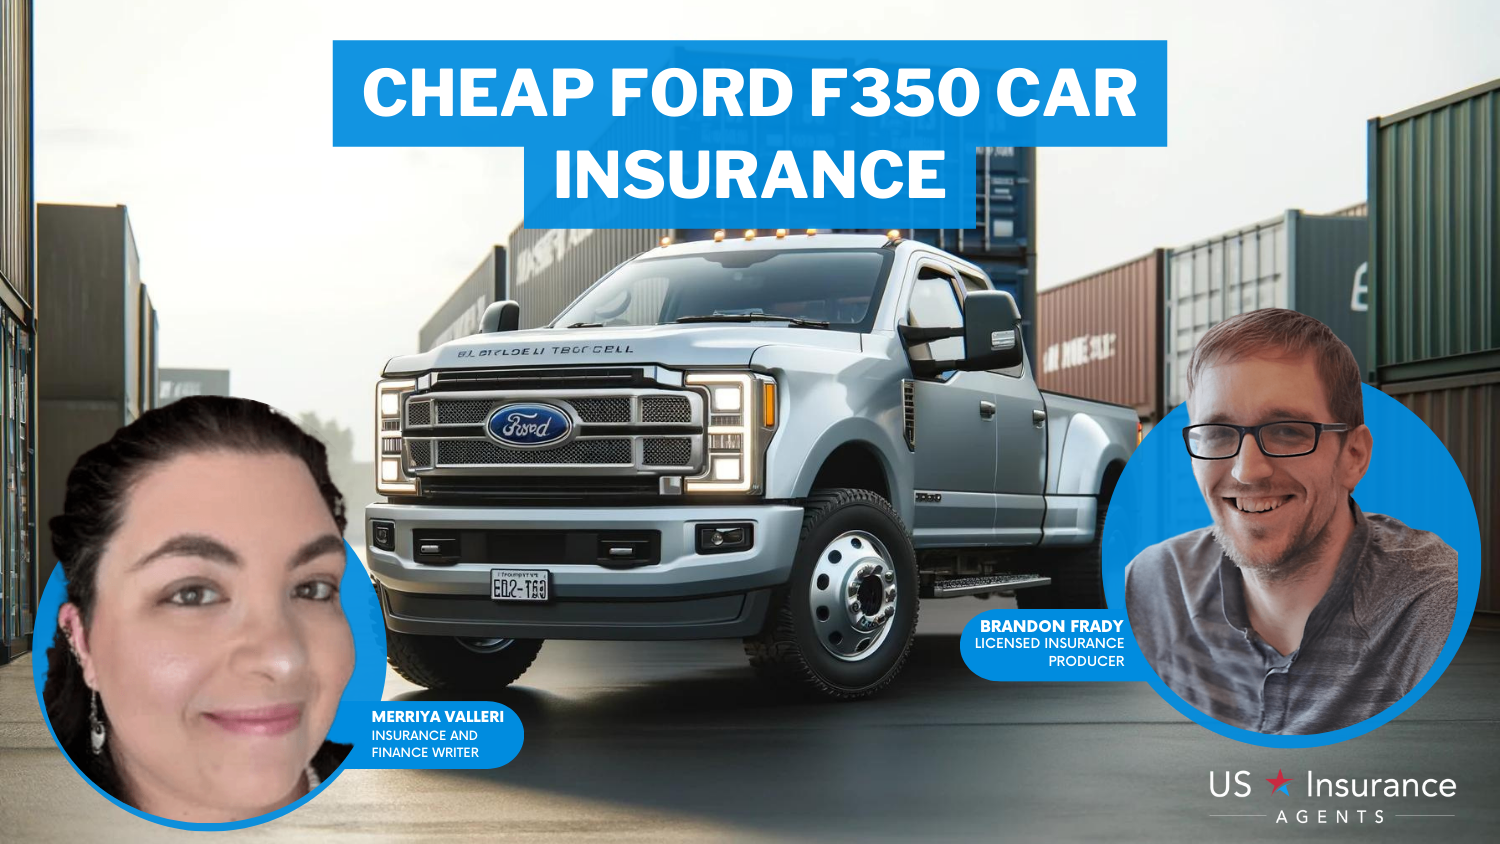 Cheap Ford F350 Car Insurance: USAA, State Farm, and Safeco